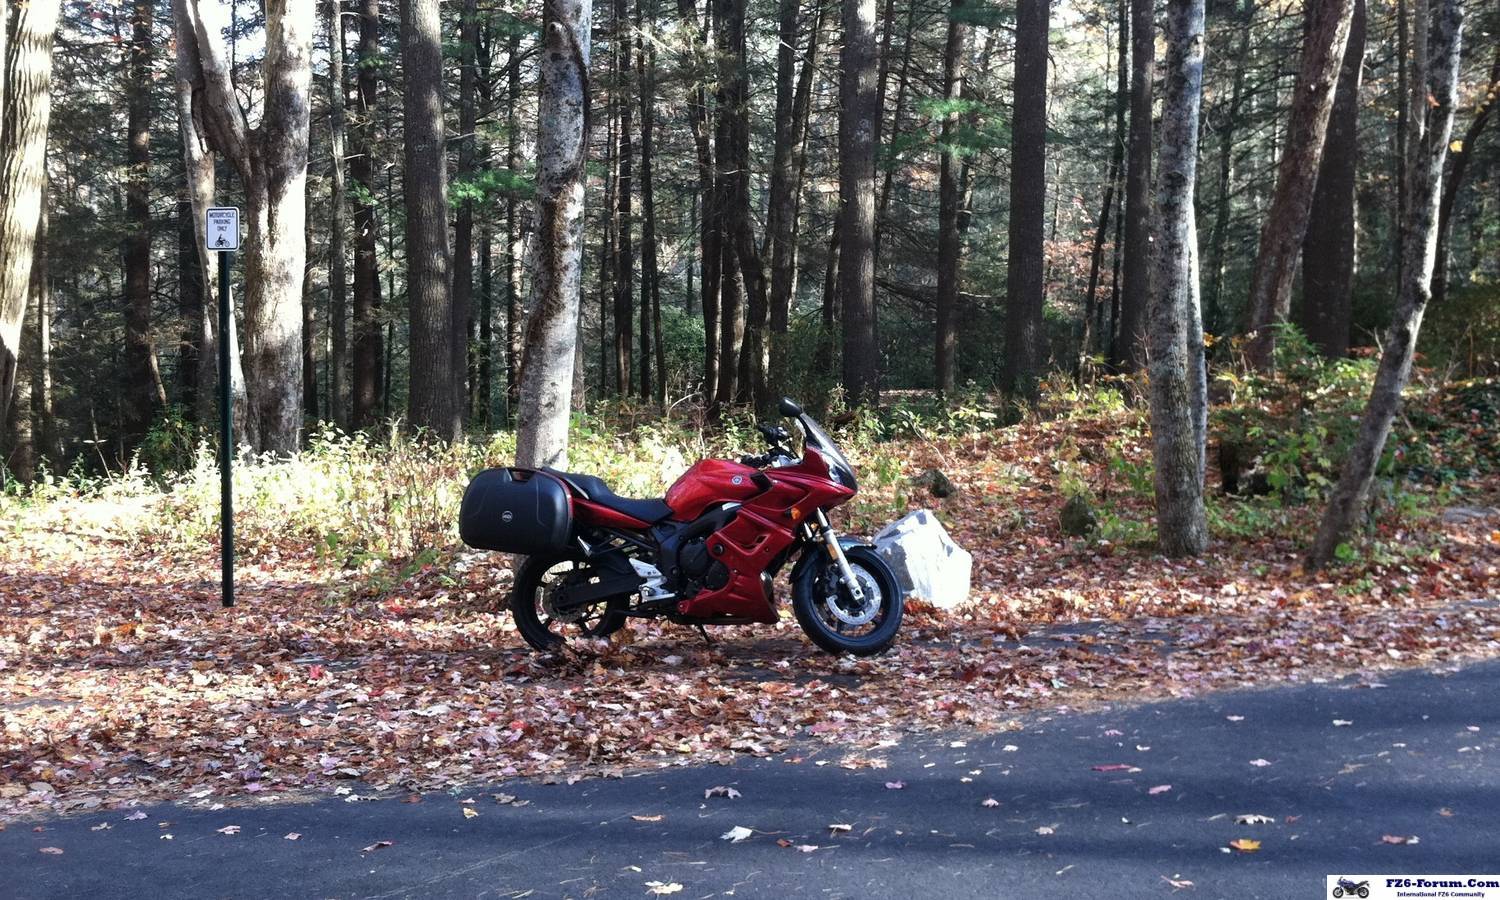 Taking a break from the twisties at Blood Mountain.